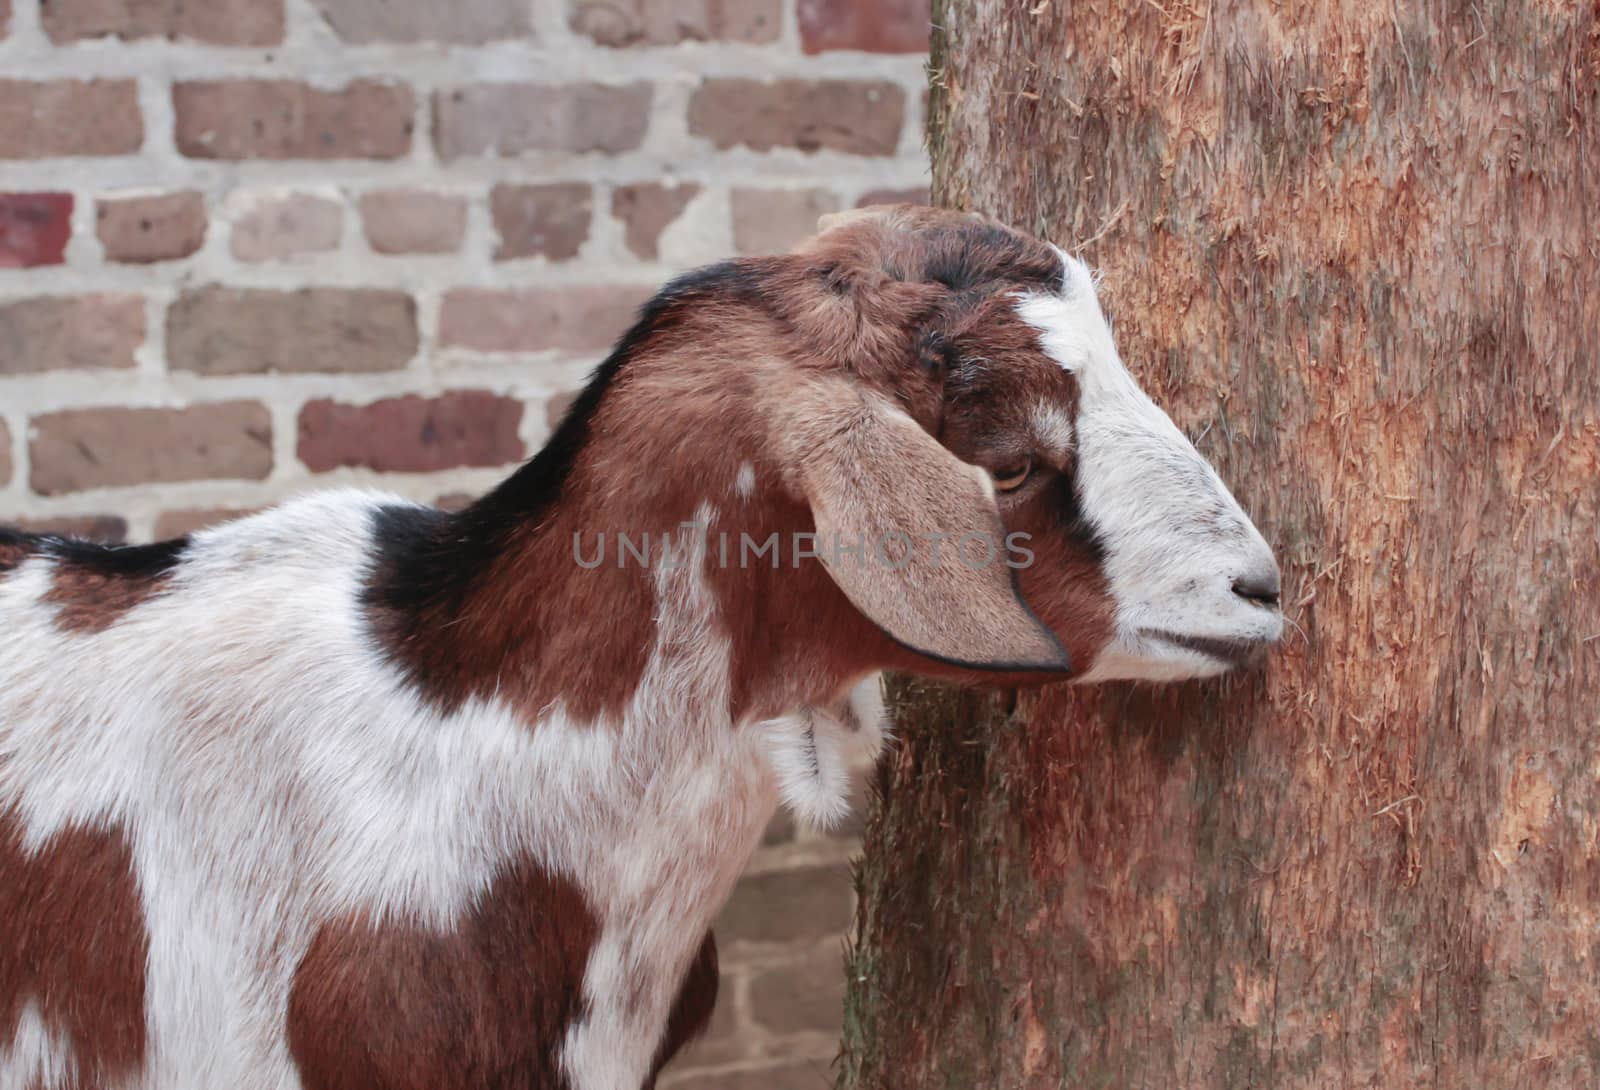 Goat standing by tree in front of brick wall